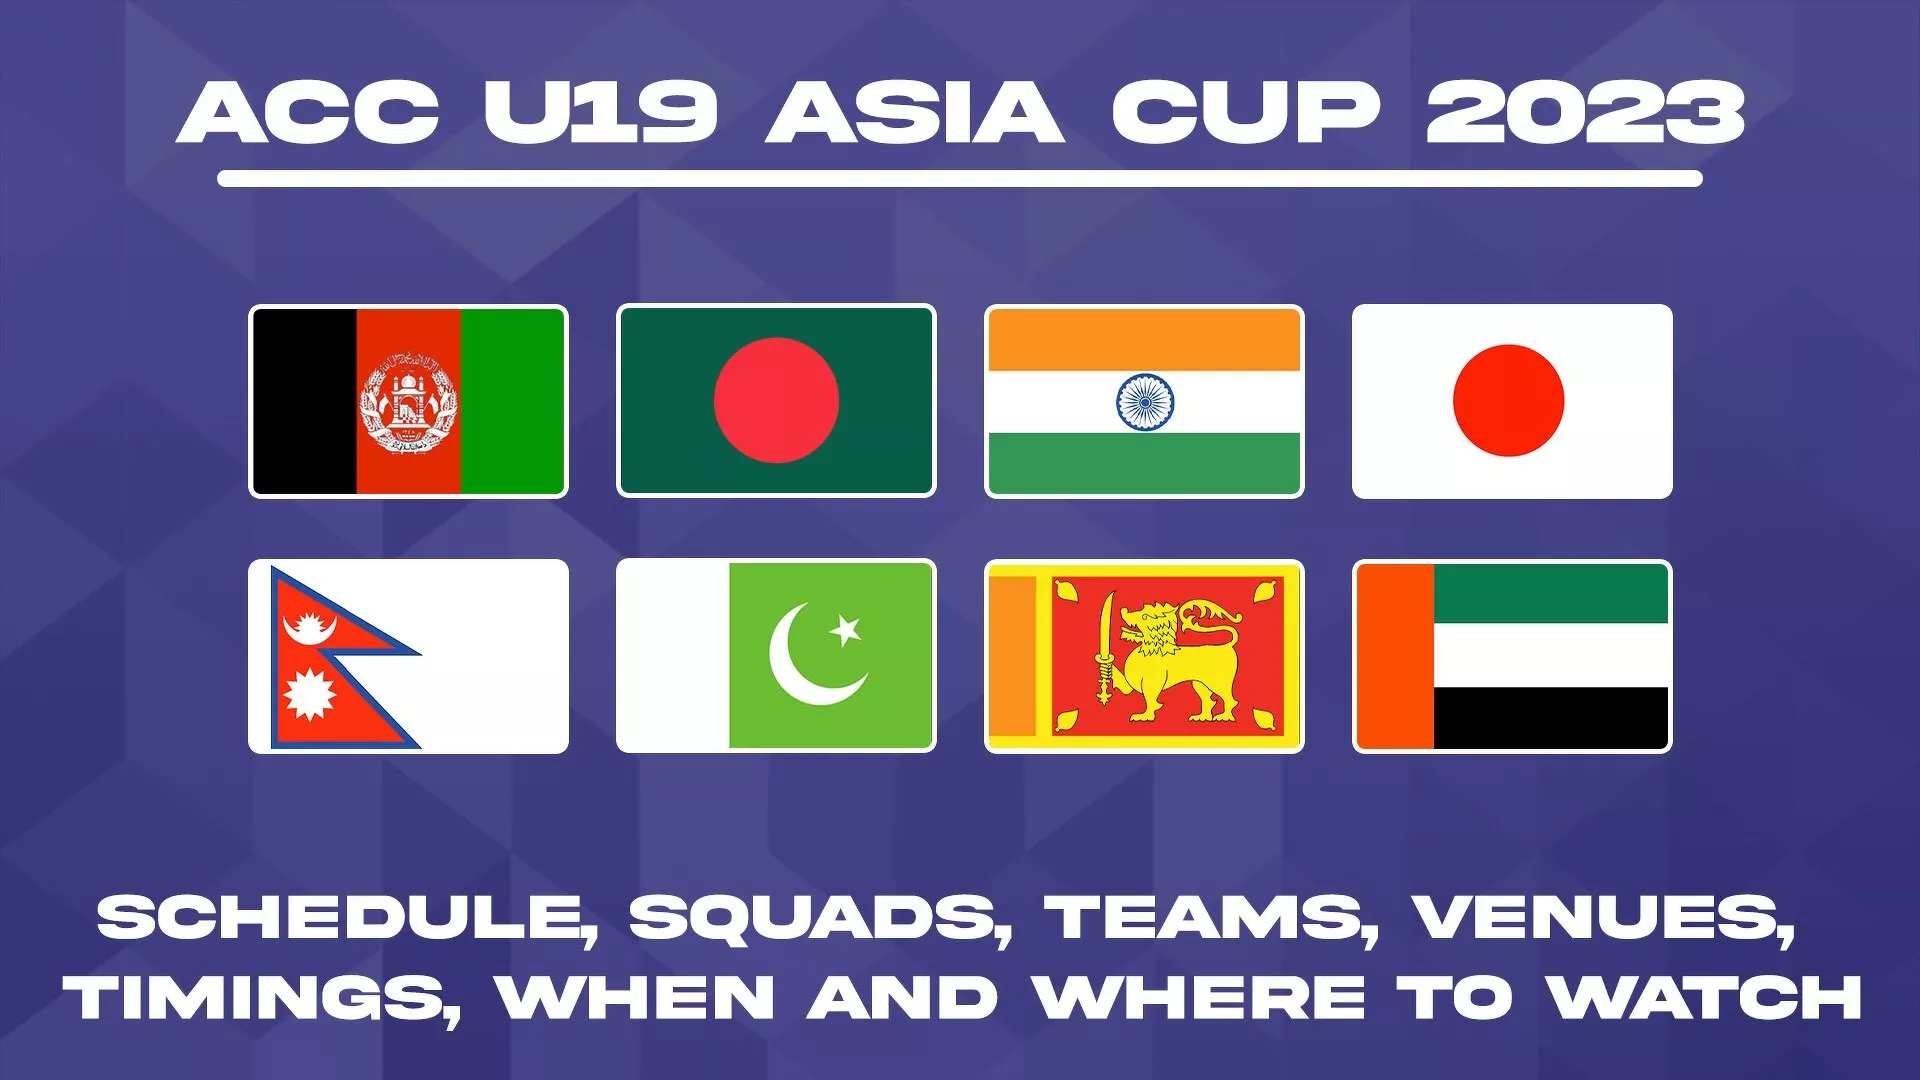 ACC U19 Asia Cup 2023 Schedule, squads, venues, when and where to watch